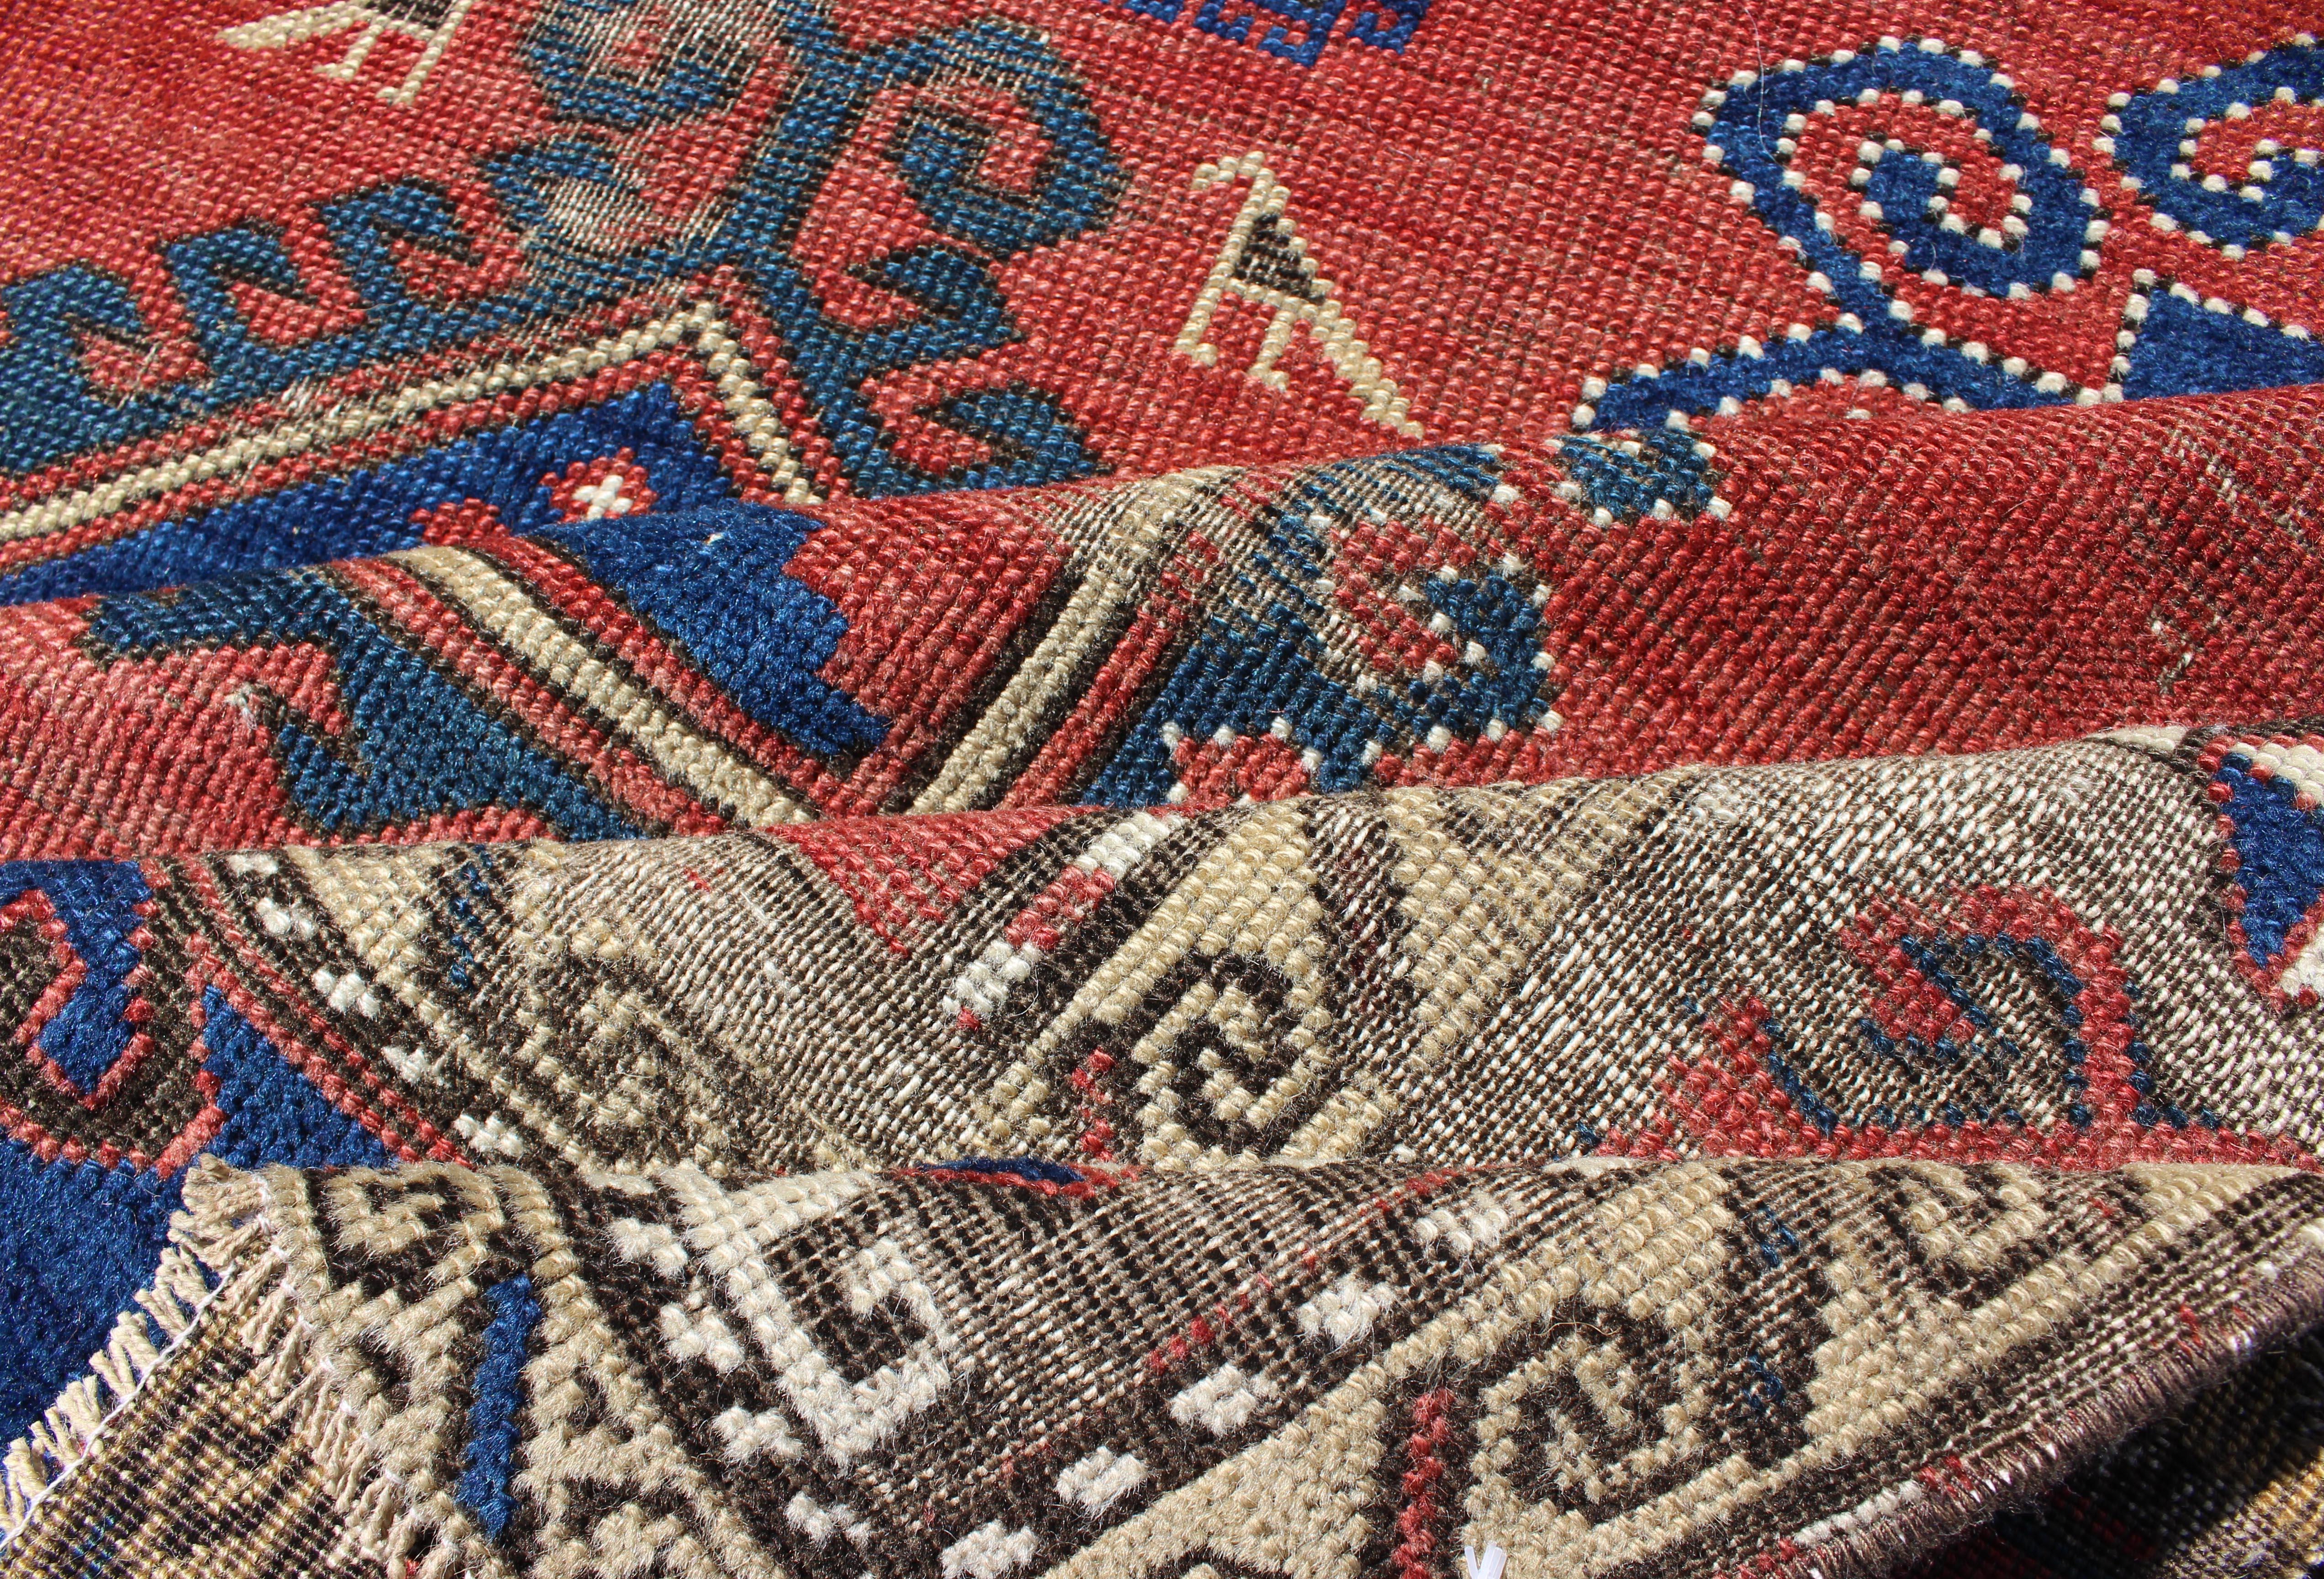 Late 19th Century Antique Caucasian Kazak Rug with Tri-Medallion Geometric Design in Red and Blue